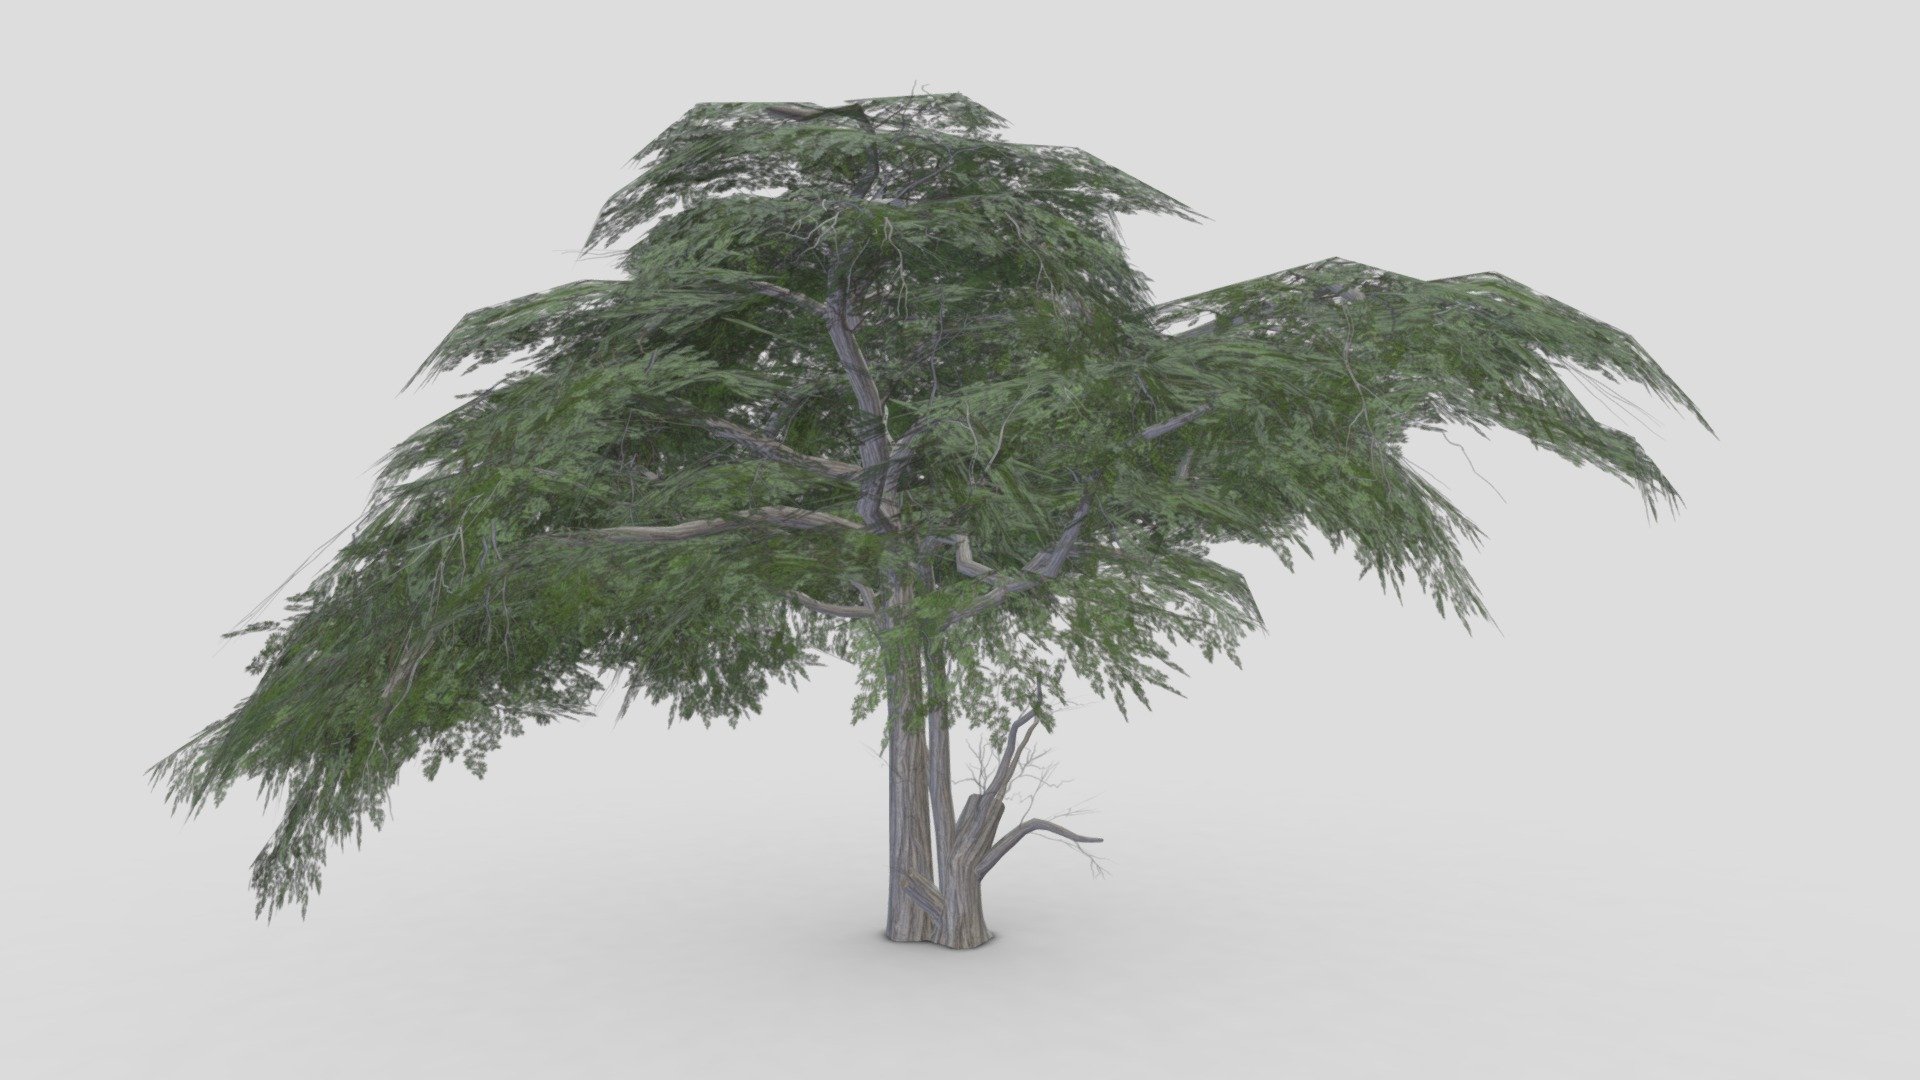 I tried to work on Acacia Tree 3D model. So after a long time I made this 3D low poly model of Acacia Tree 3d model